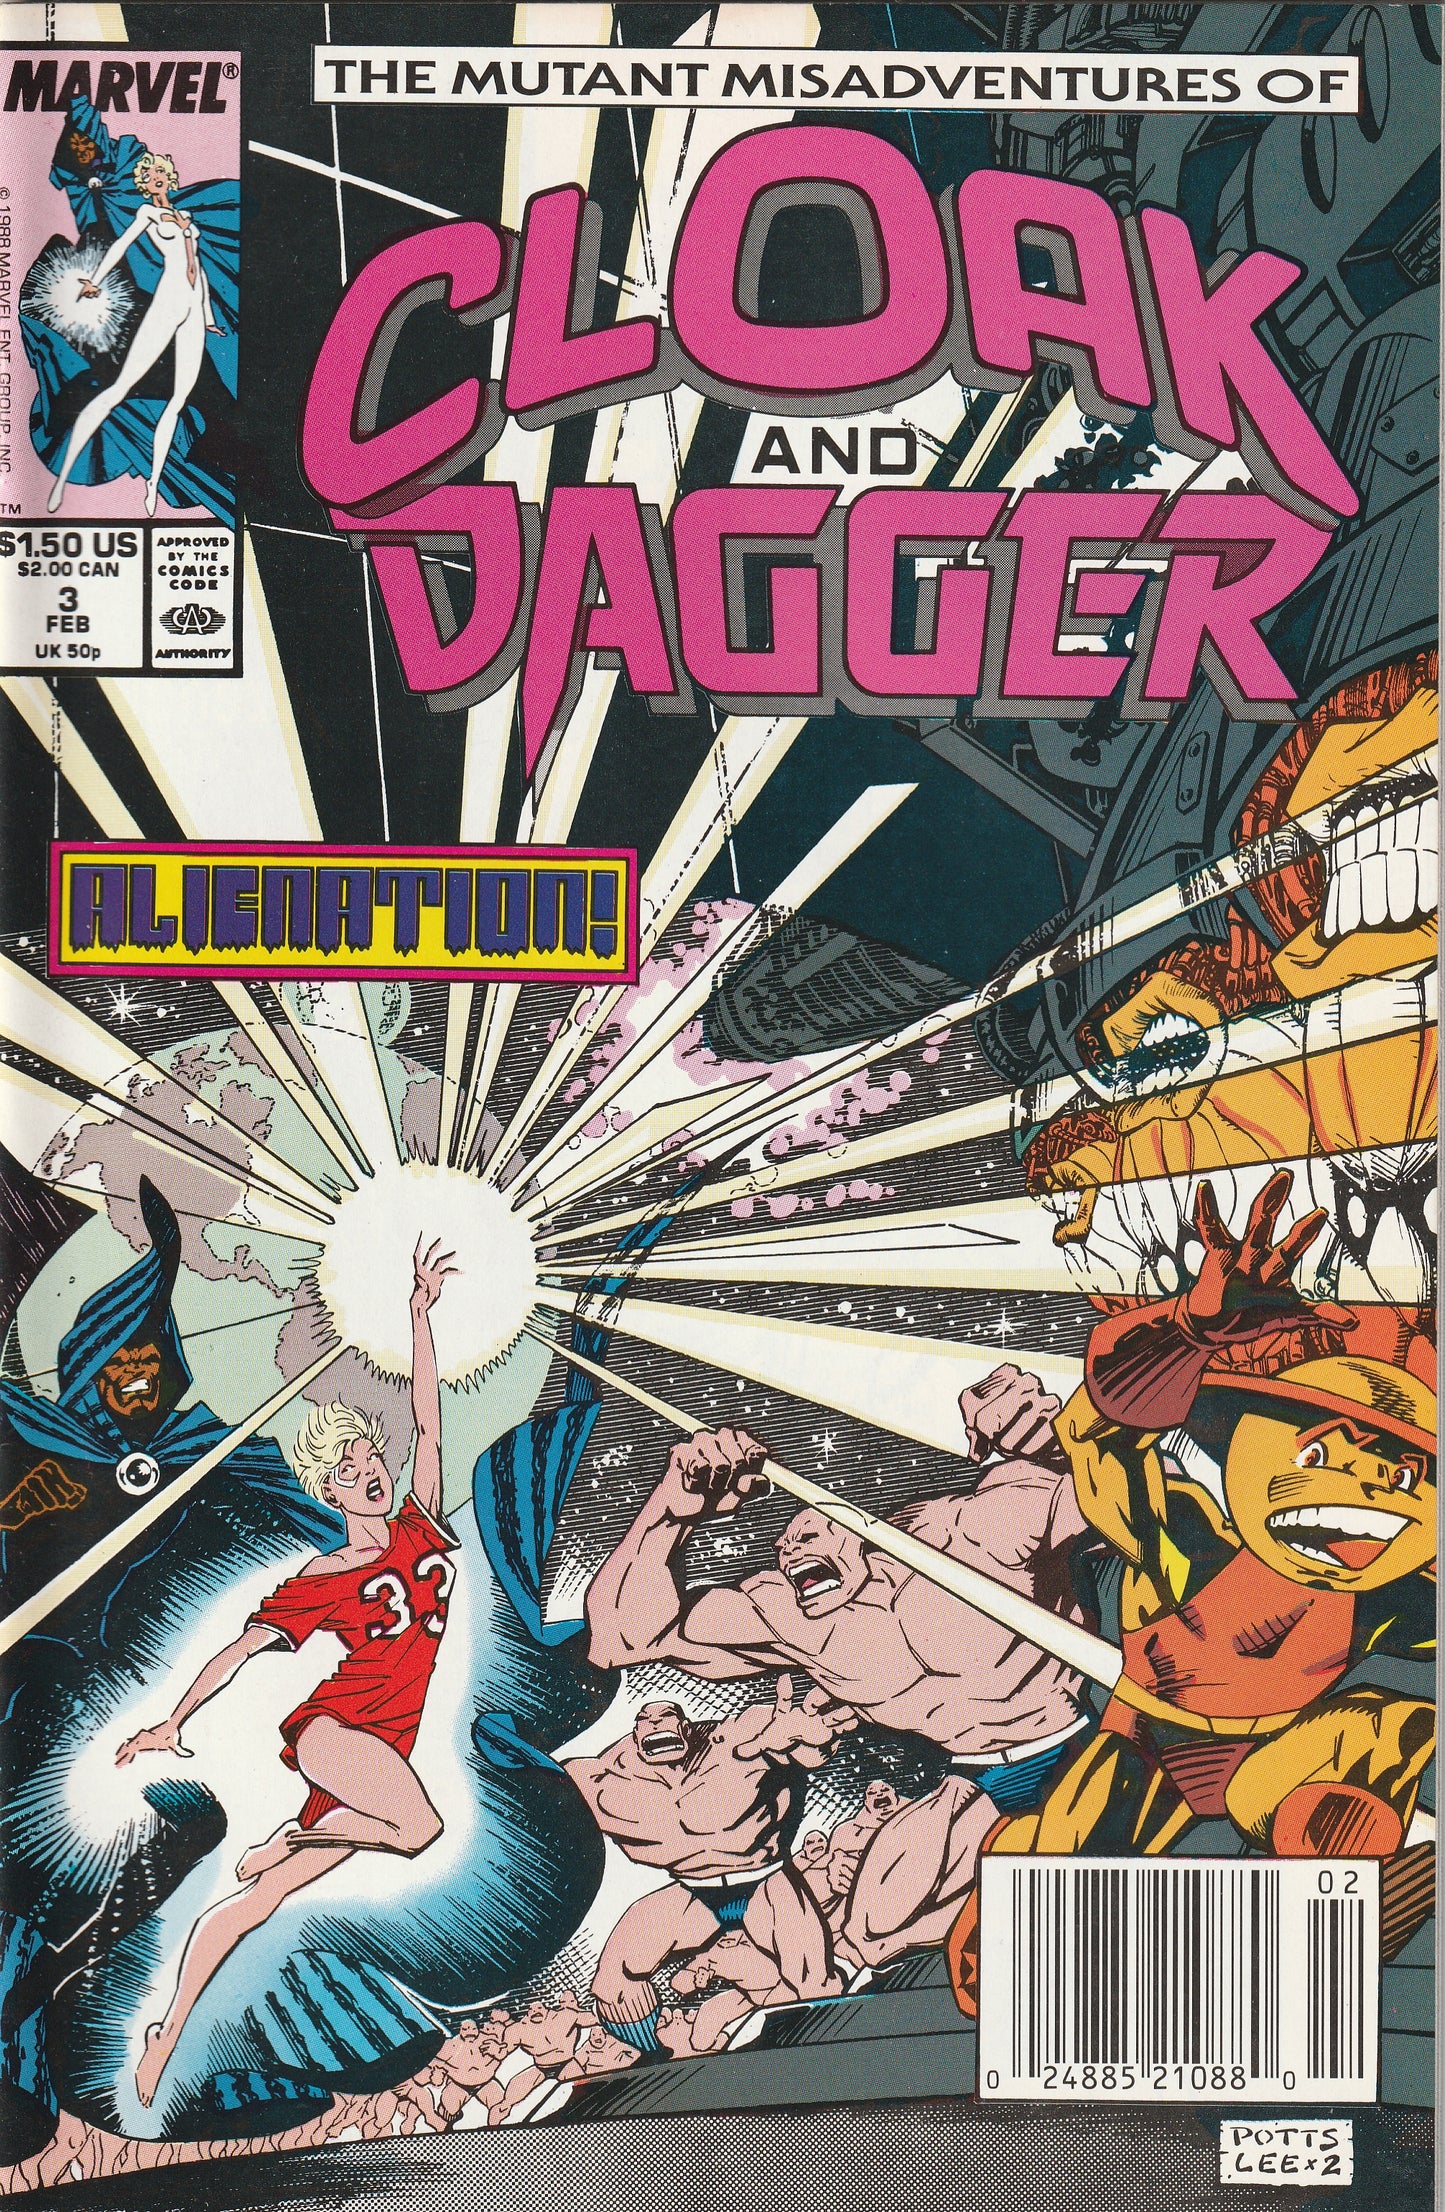 The Mutant Misadventures of Cloak and Dagger #3 (1989)